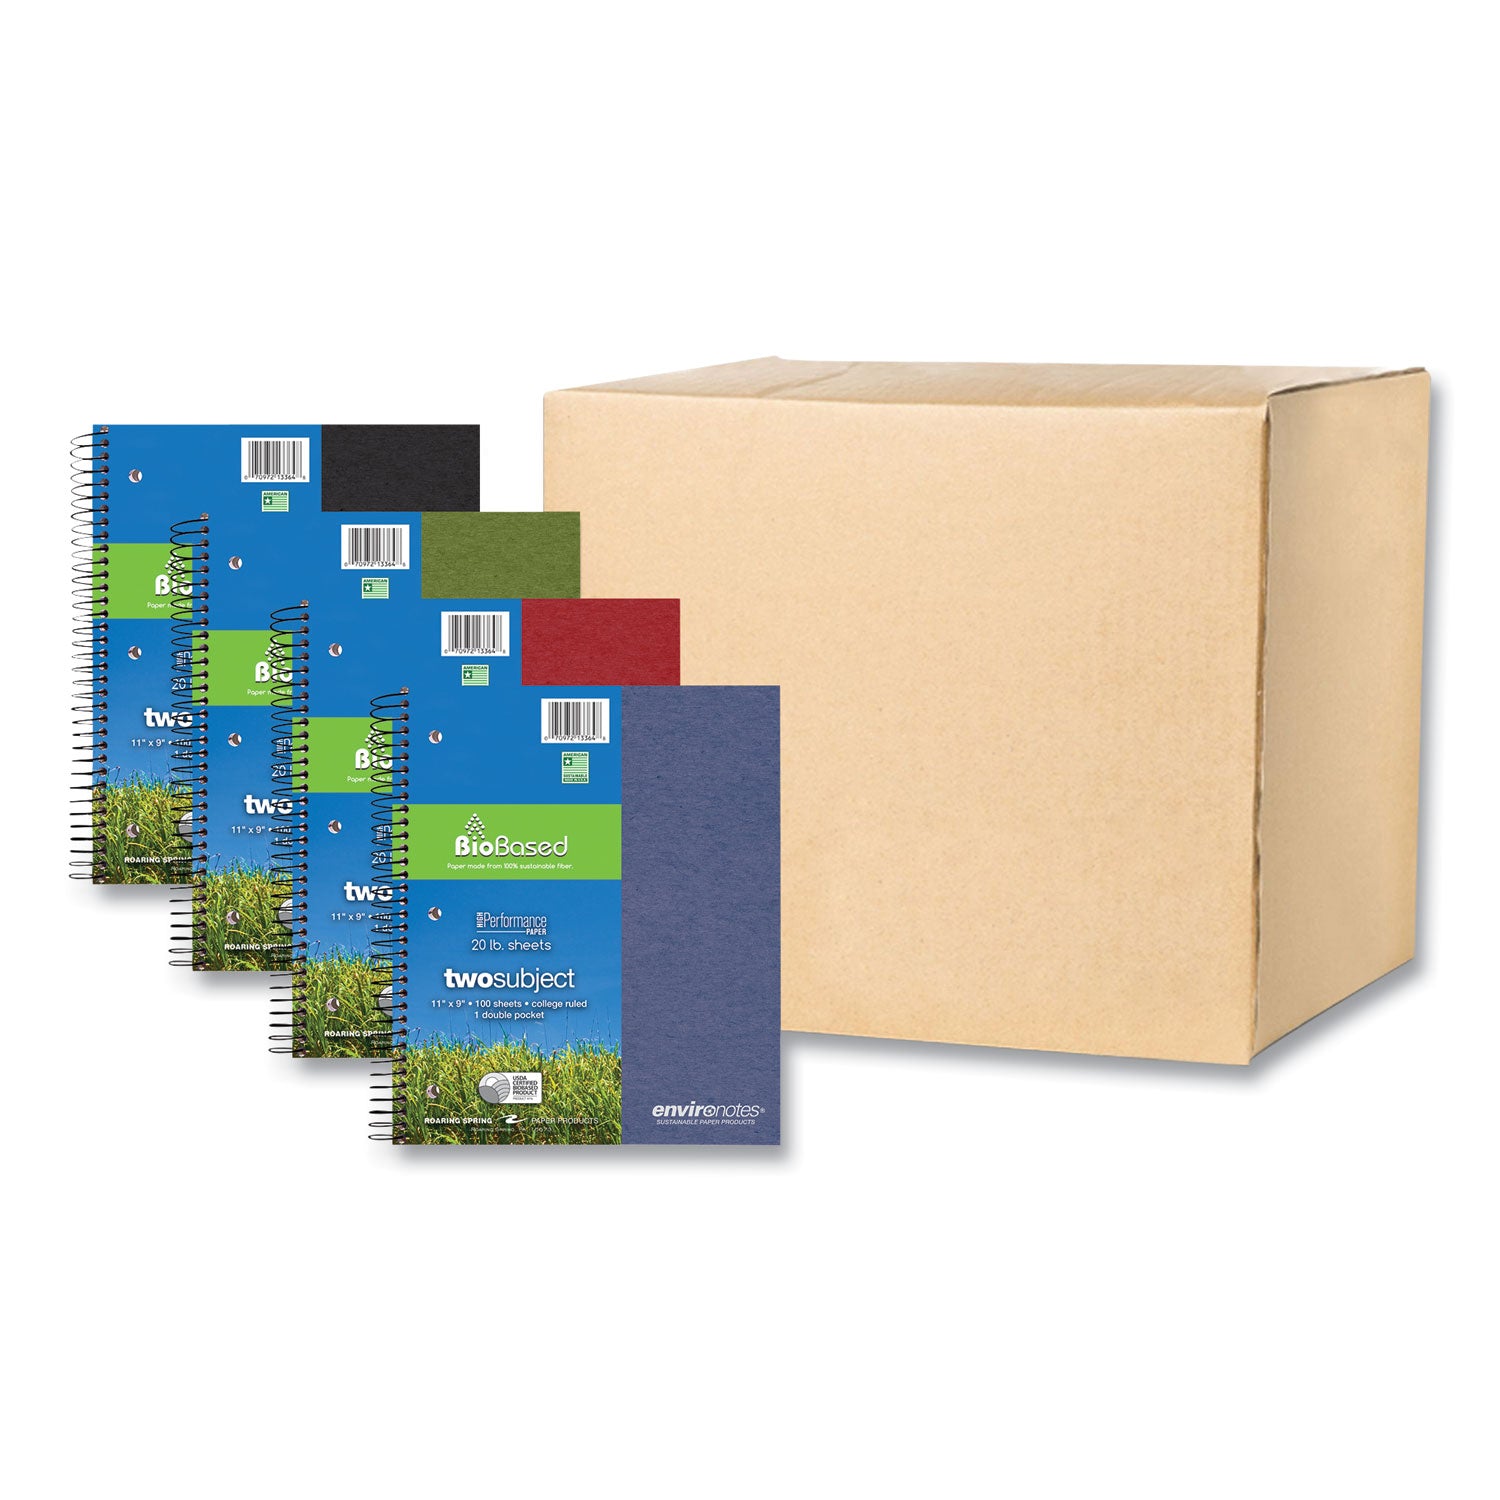 earthtones-biobased-2-subject-notebook-med-college-rule-random-asst-covers-100-11x9-sheets-24-ctships-in-4-6-bus-days_roa13364cs - 1